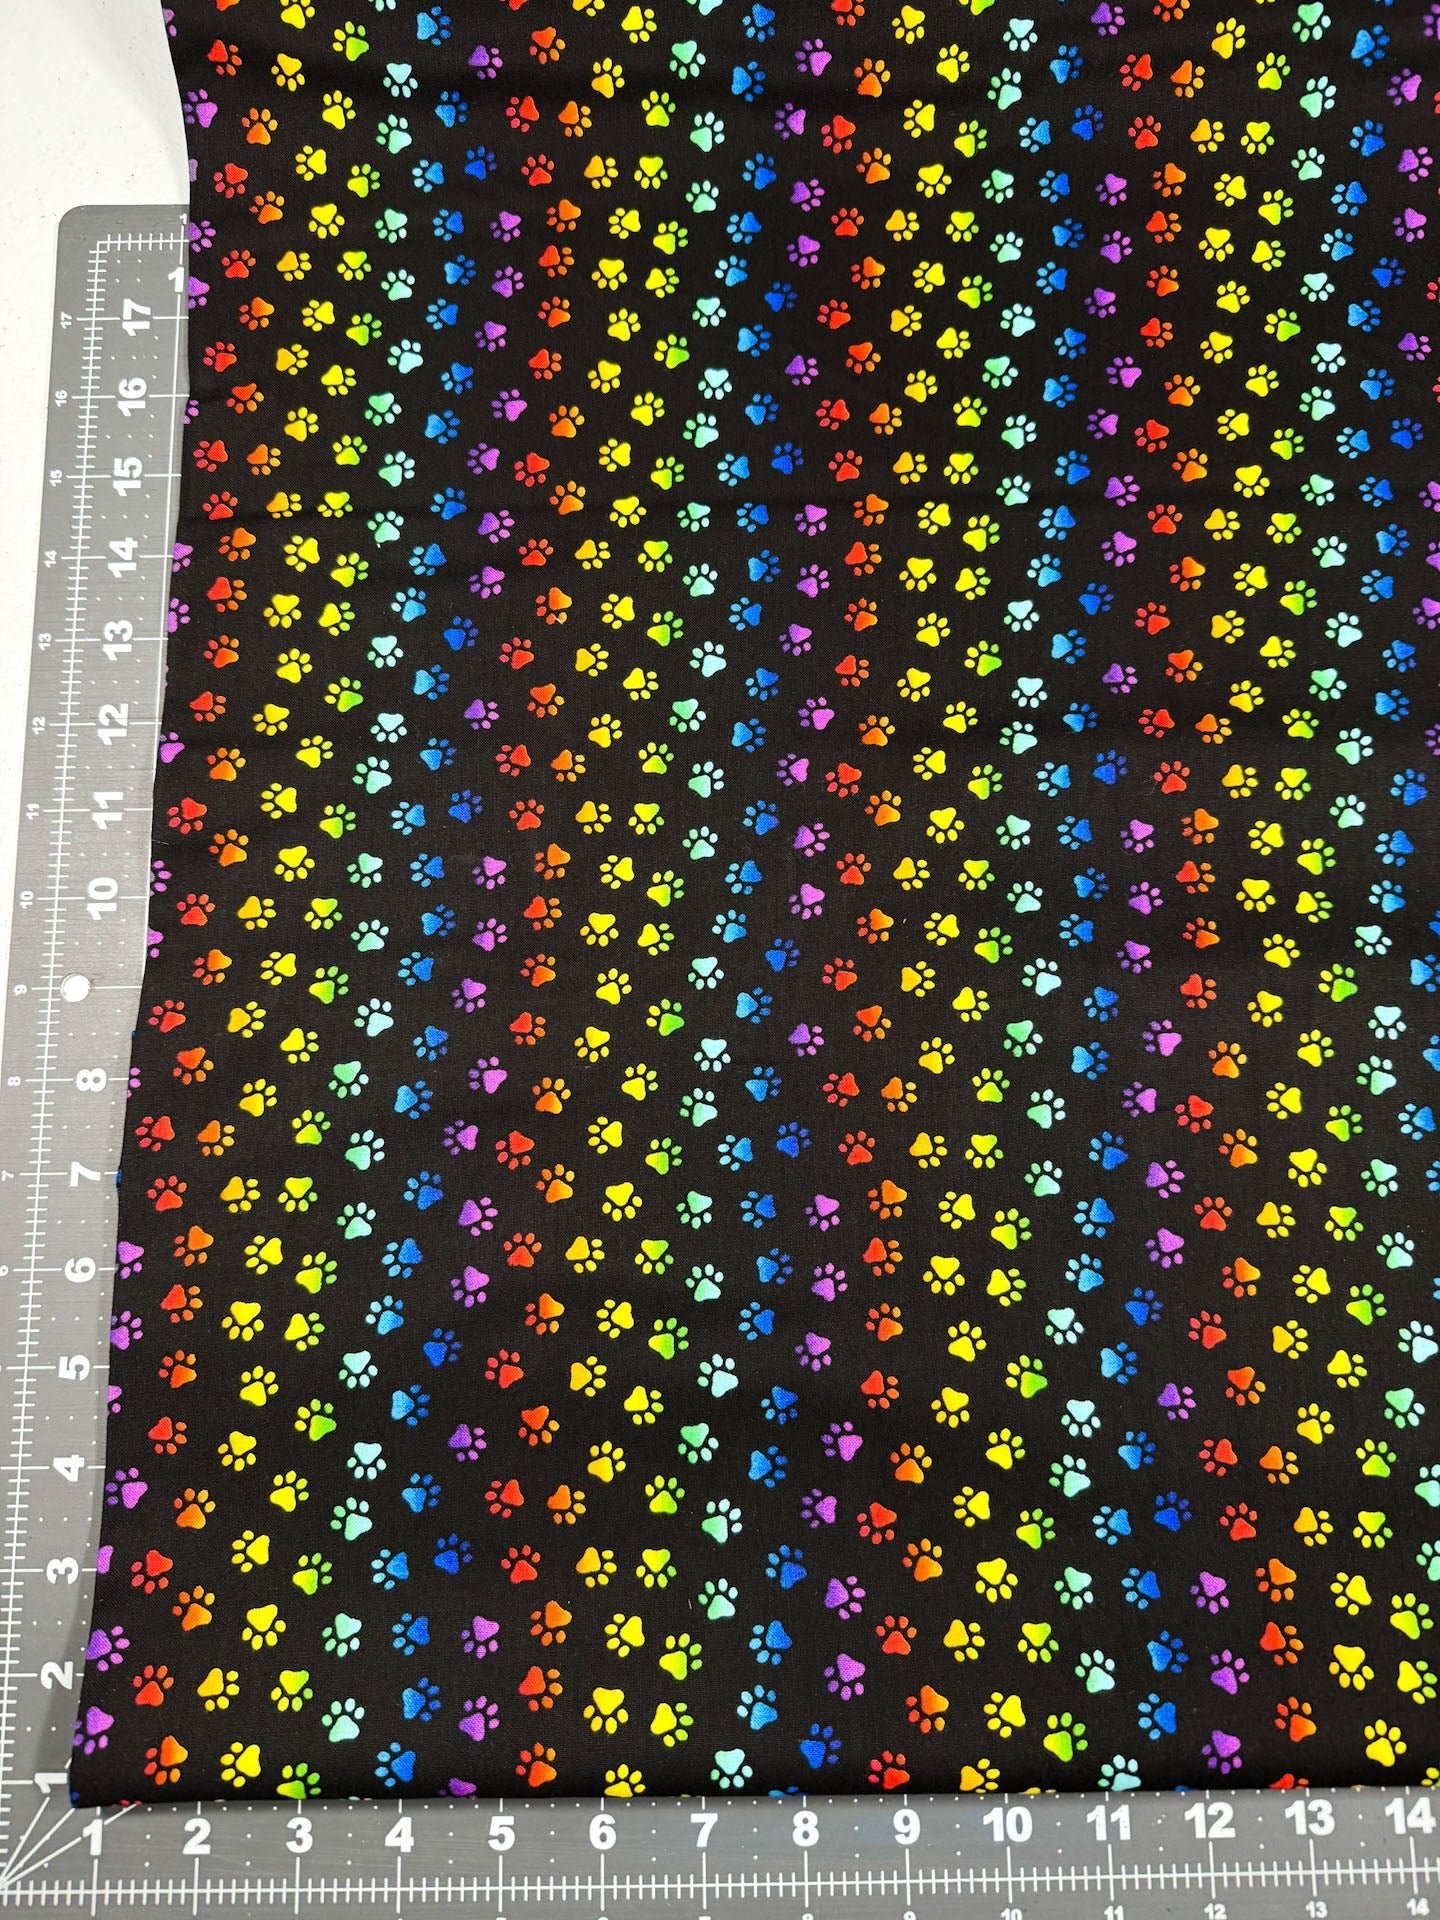 Neon Cat Paw fabric Allover animal paws